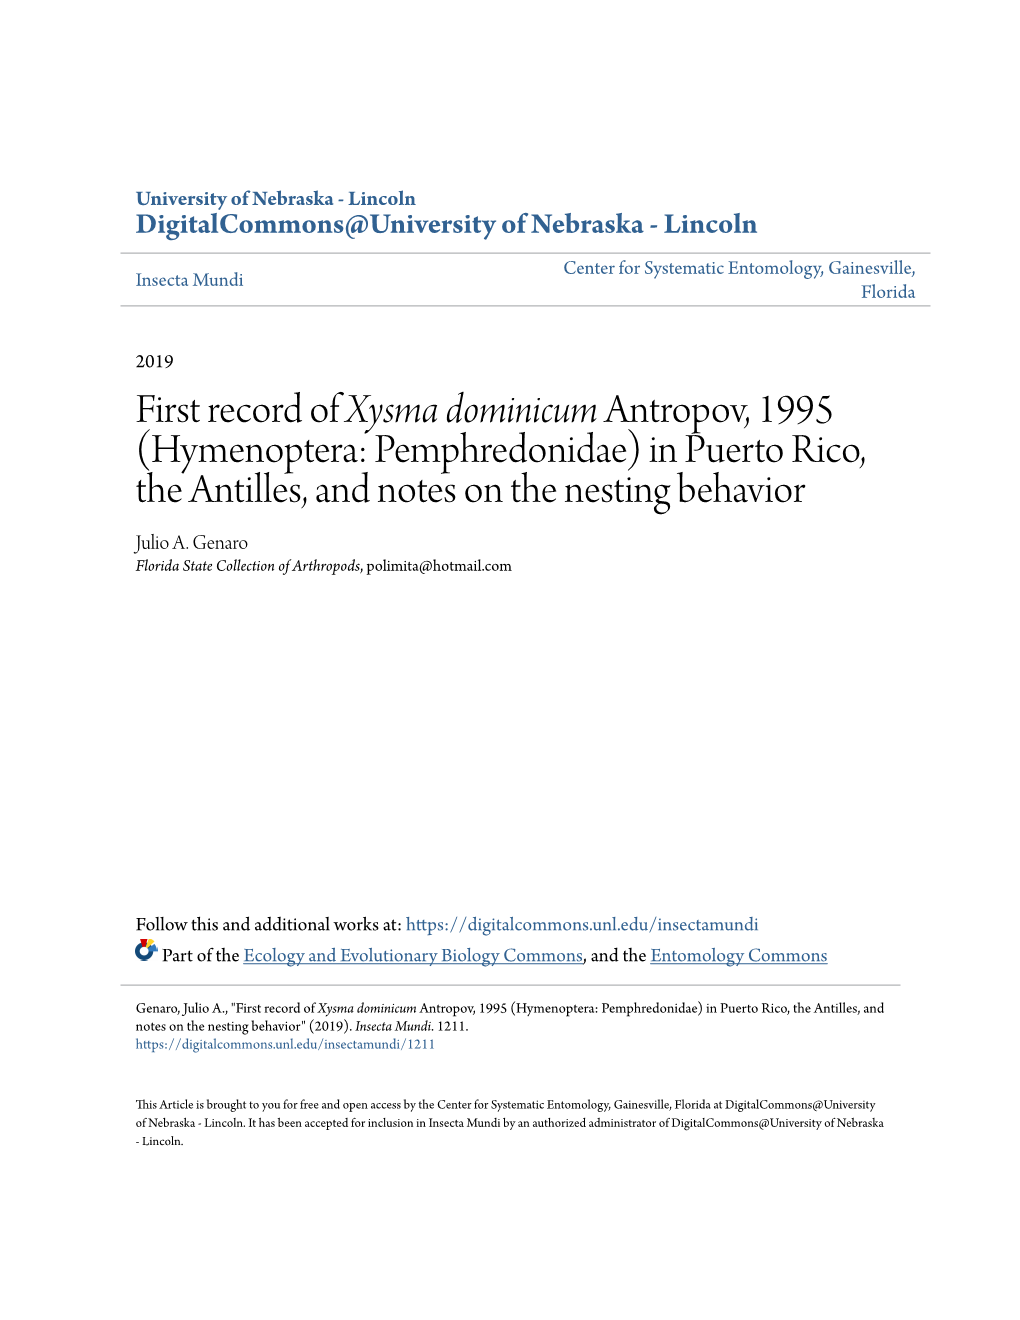 First Record of &lt;I&gt;Xysma Dominicum&lt;/I&gt; Antropov, 1995 (Hymenoptera: Pemphredonidae) in Puerto Rico, the Antilles, An